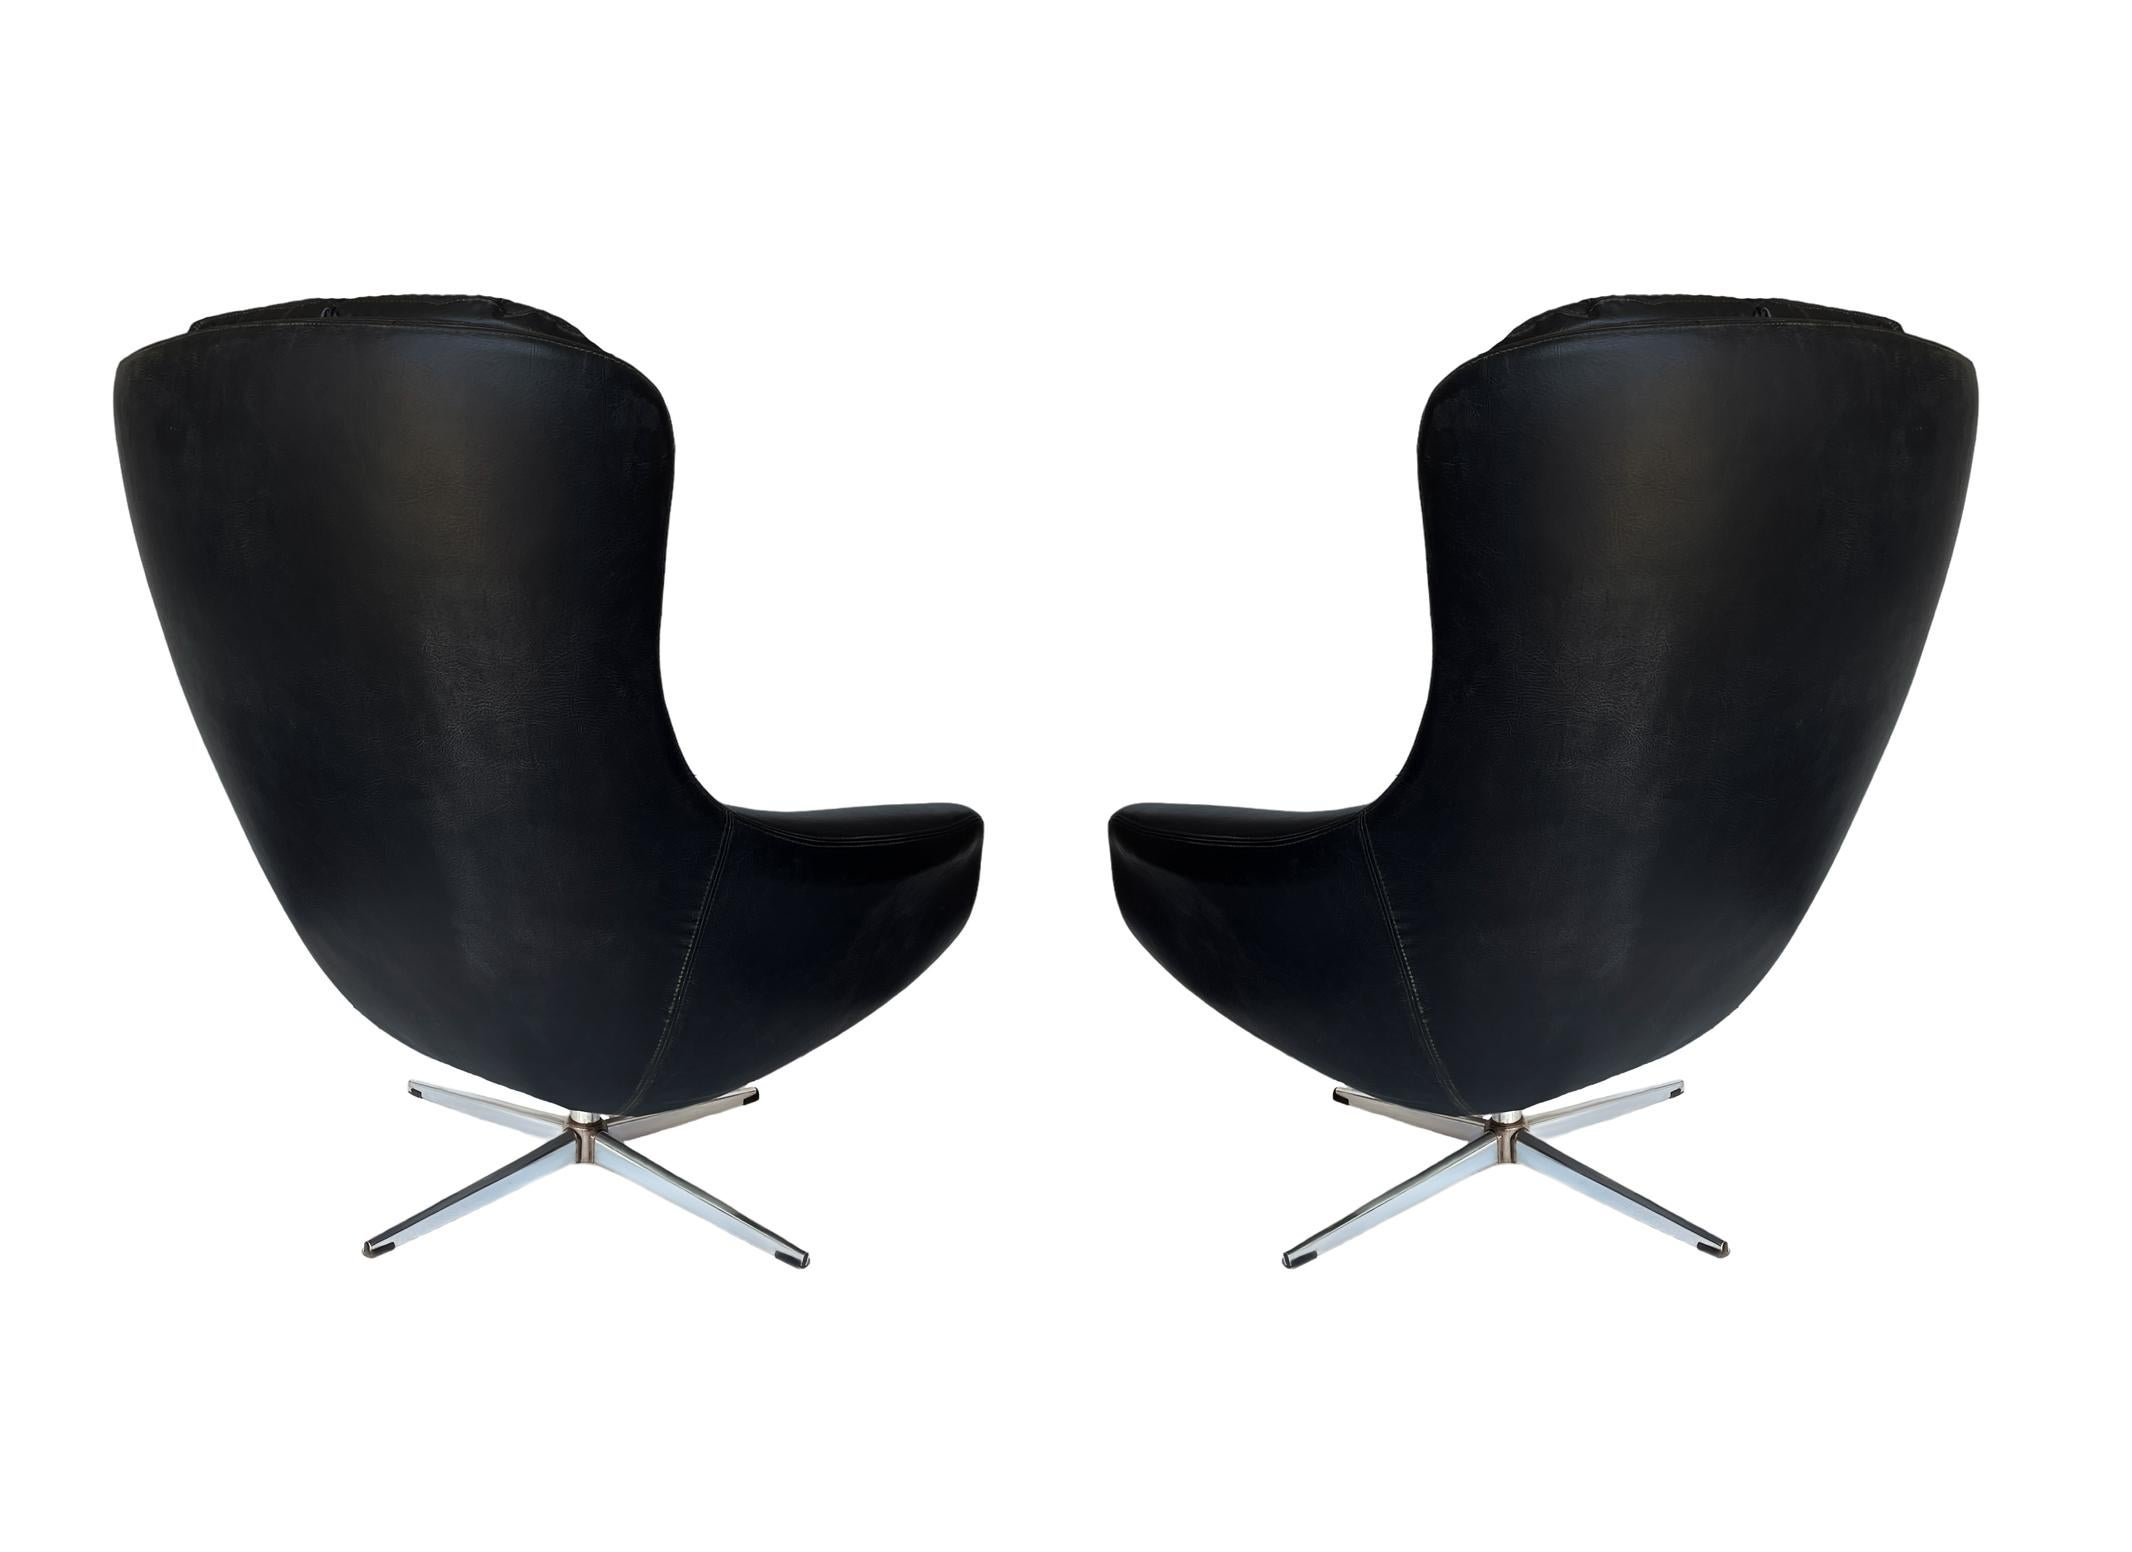 Pair of Mid Century Modern Black Swivel Lounge Chairs by Overman Sweden  In Good Condition For Sale In Philadelphia, PA